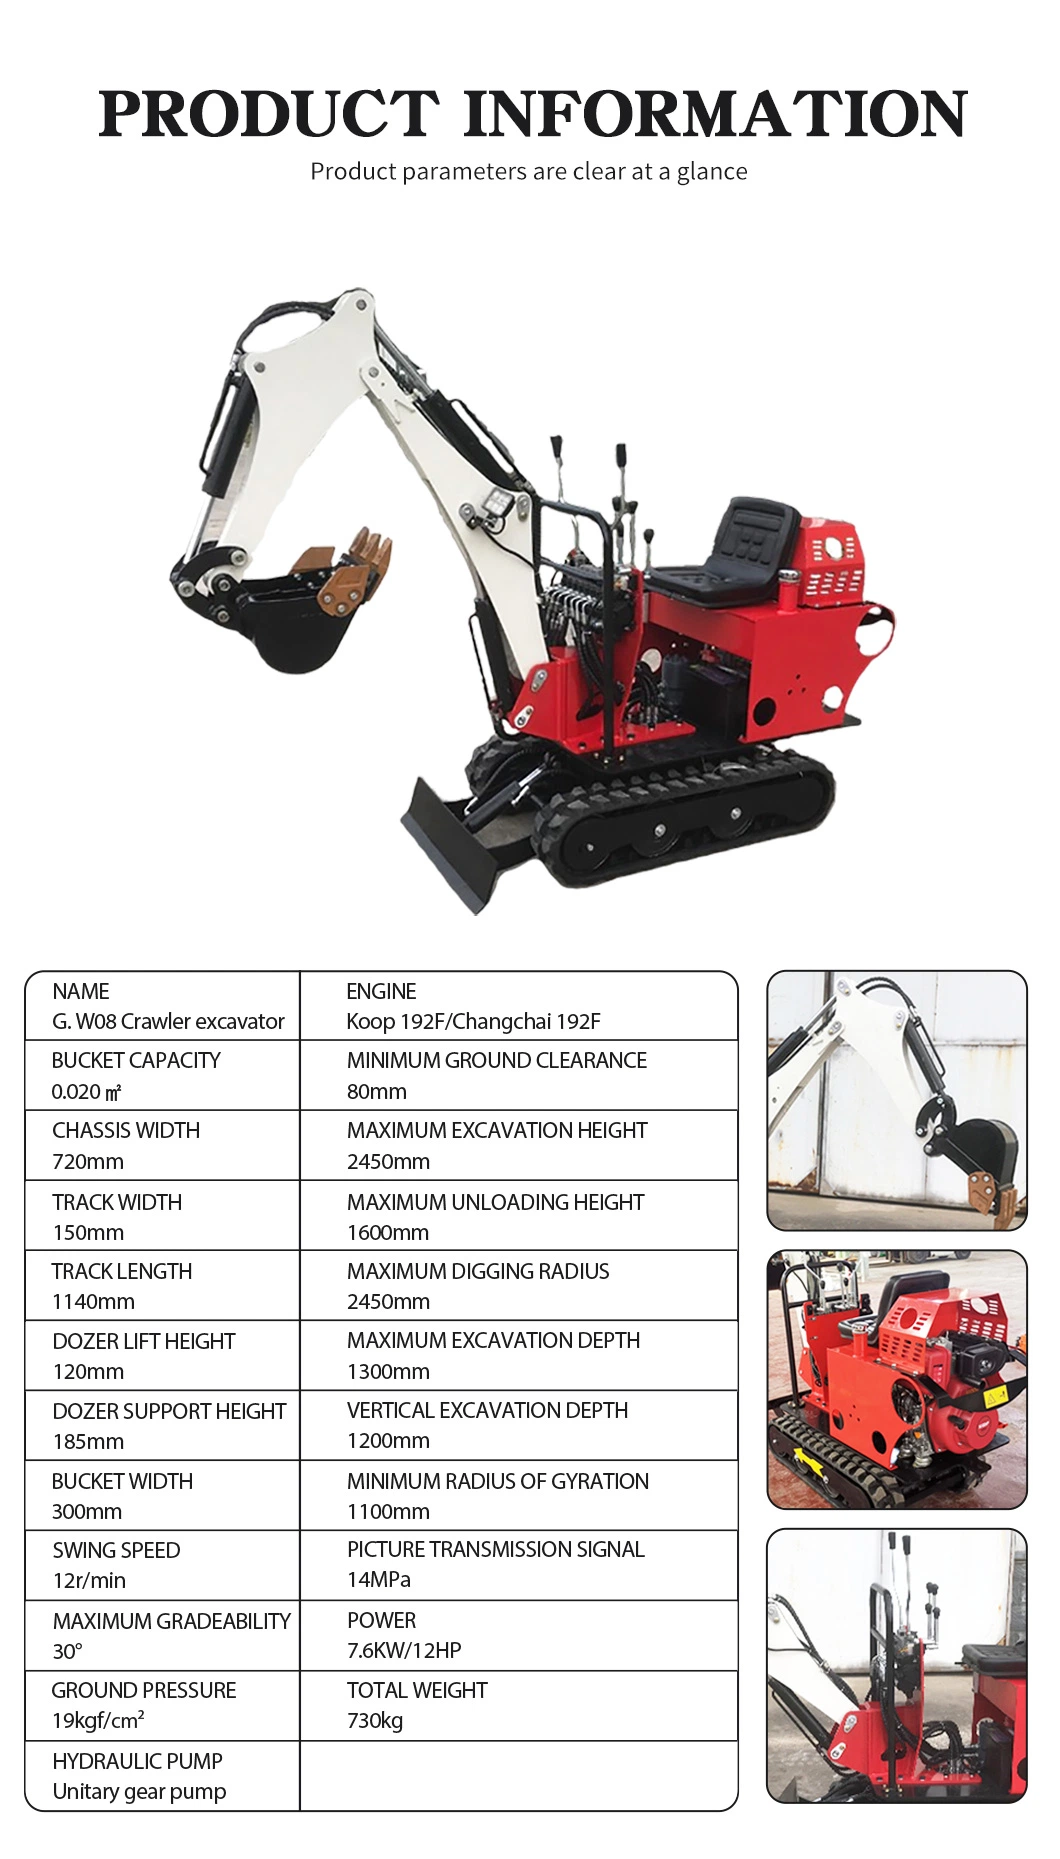 China Famous Brand Ht 800kg 1000kg 1500kg 1.7ton 2.0ton Mini Excavator Hydraulic Diesel Electronic Flexible Basis Swing Boom EPA4 CE for Farm Constructon Small